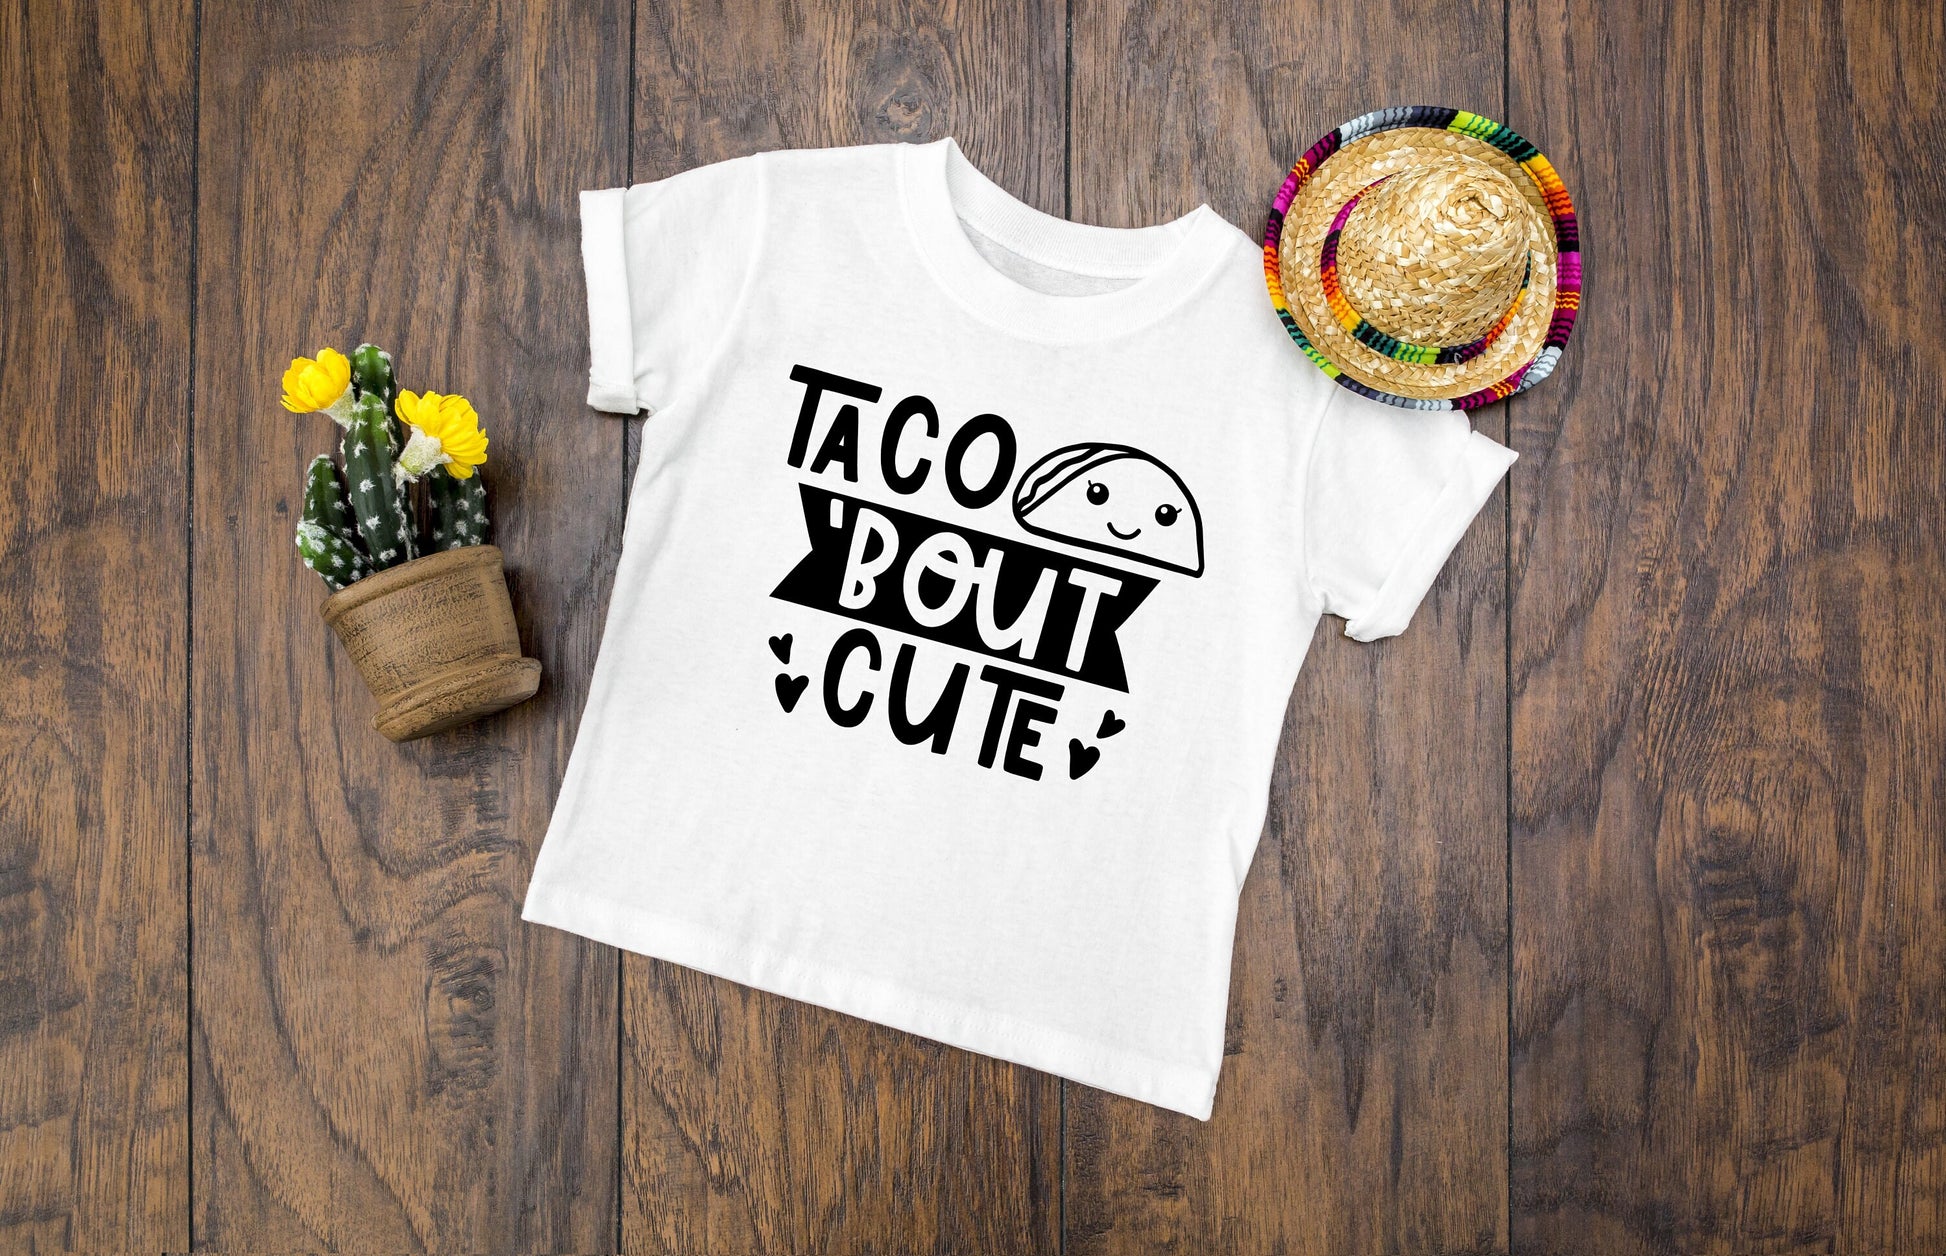 Taco Bout Cute Infant or Youth Shirt or Bodysuit - Toddler Shirt - Cute Kids Shirt - Mexican Vacation Shirt - Spring Break Shirt